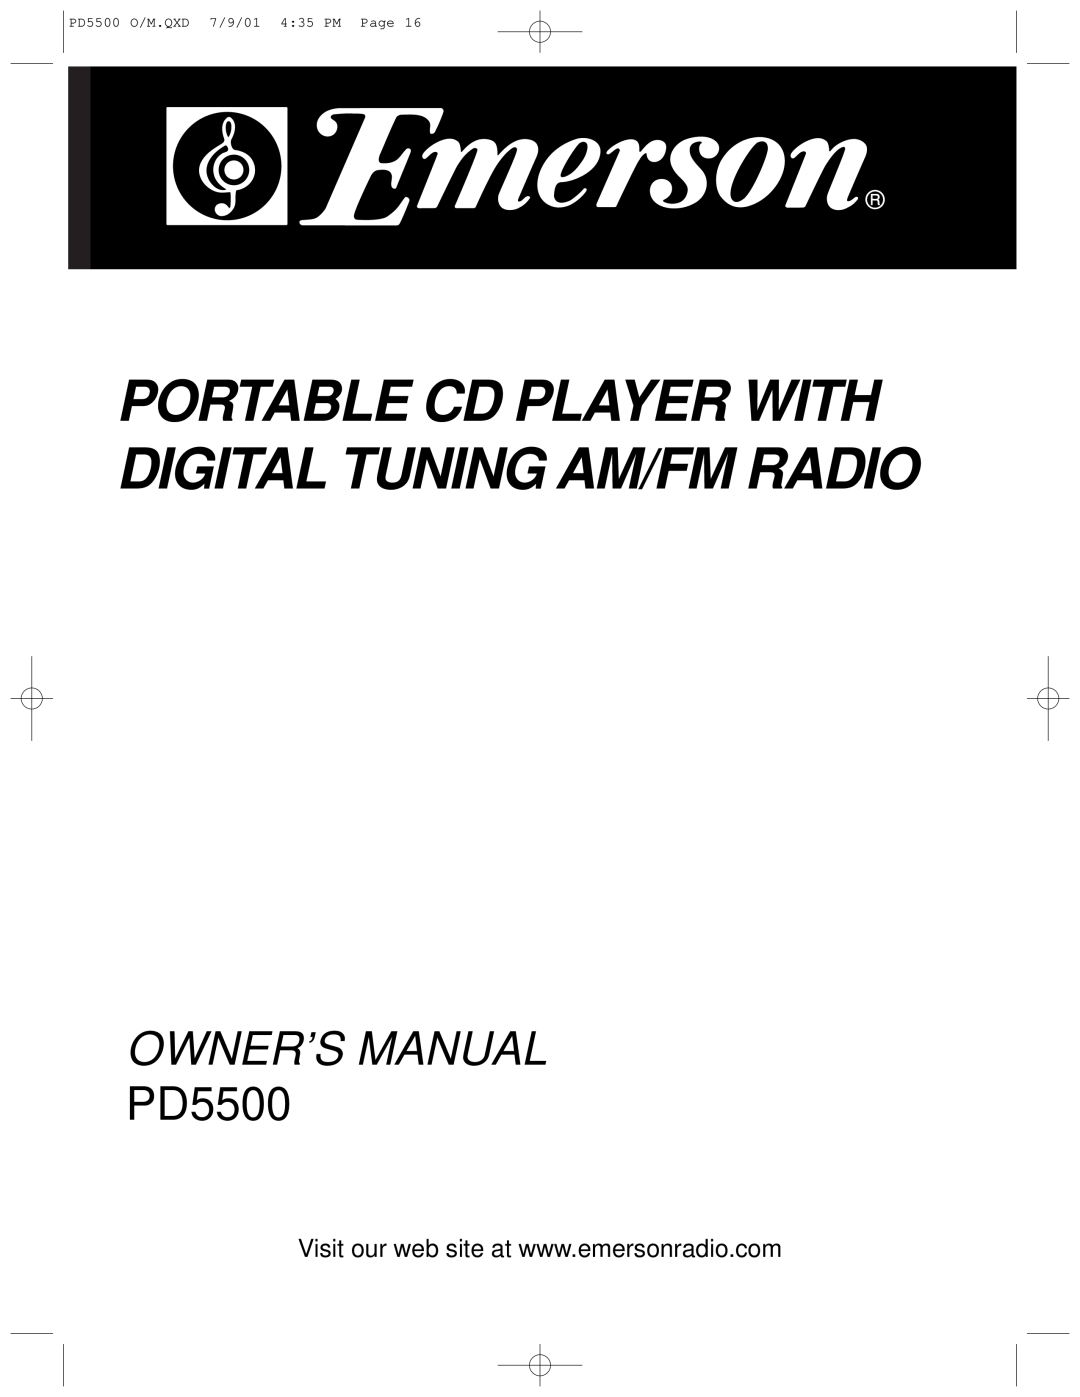 Emerson instruction manual PD5500 O/M.QXD 7/9/01 4 35 PM Page 